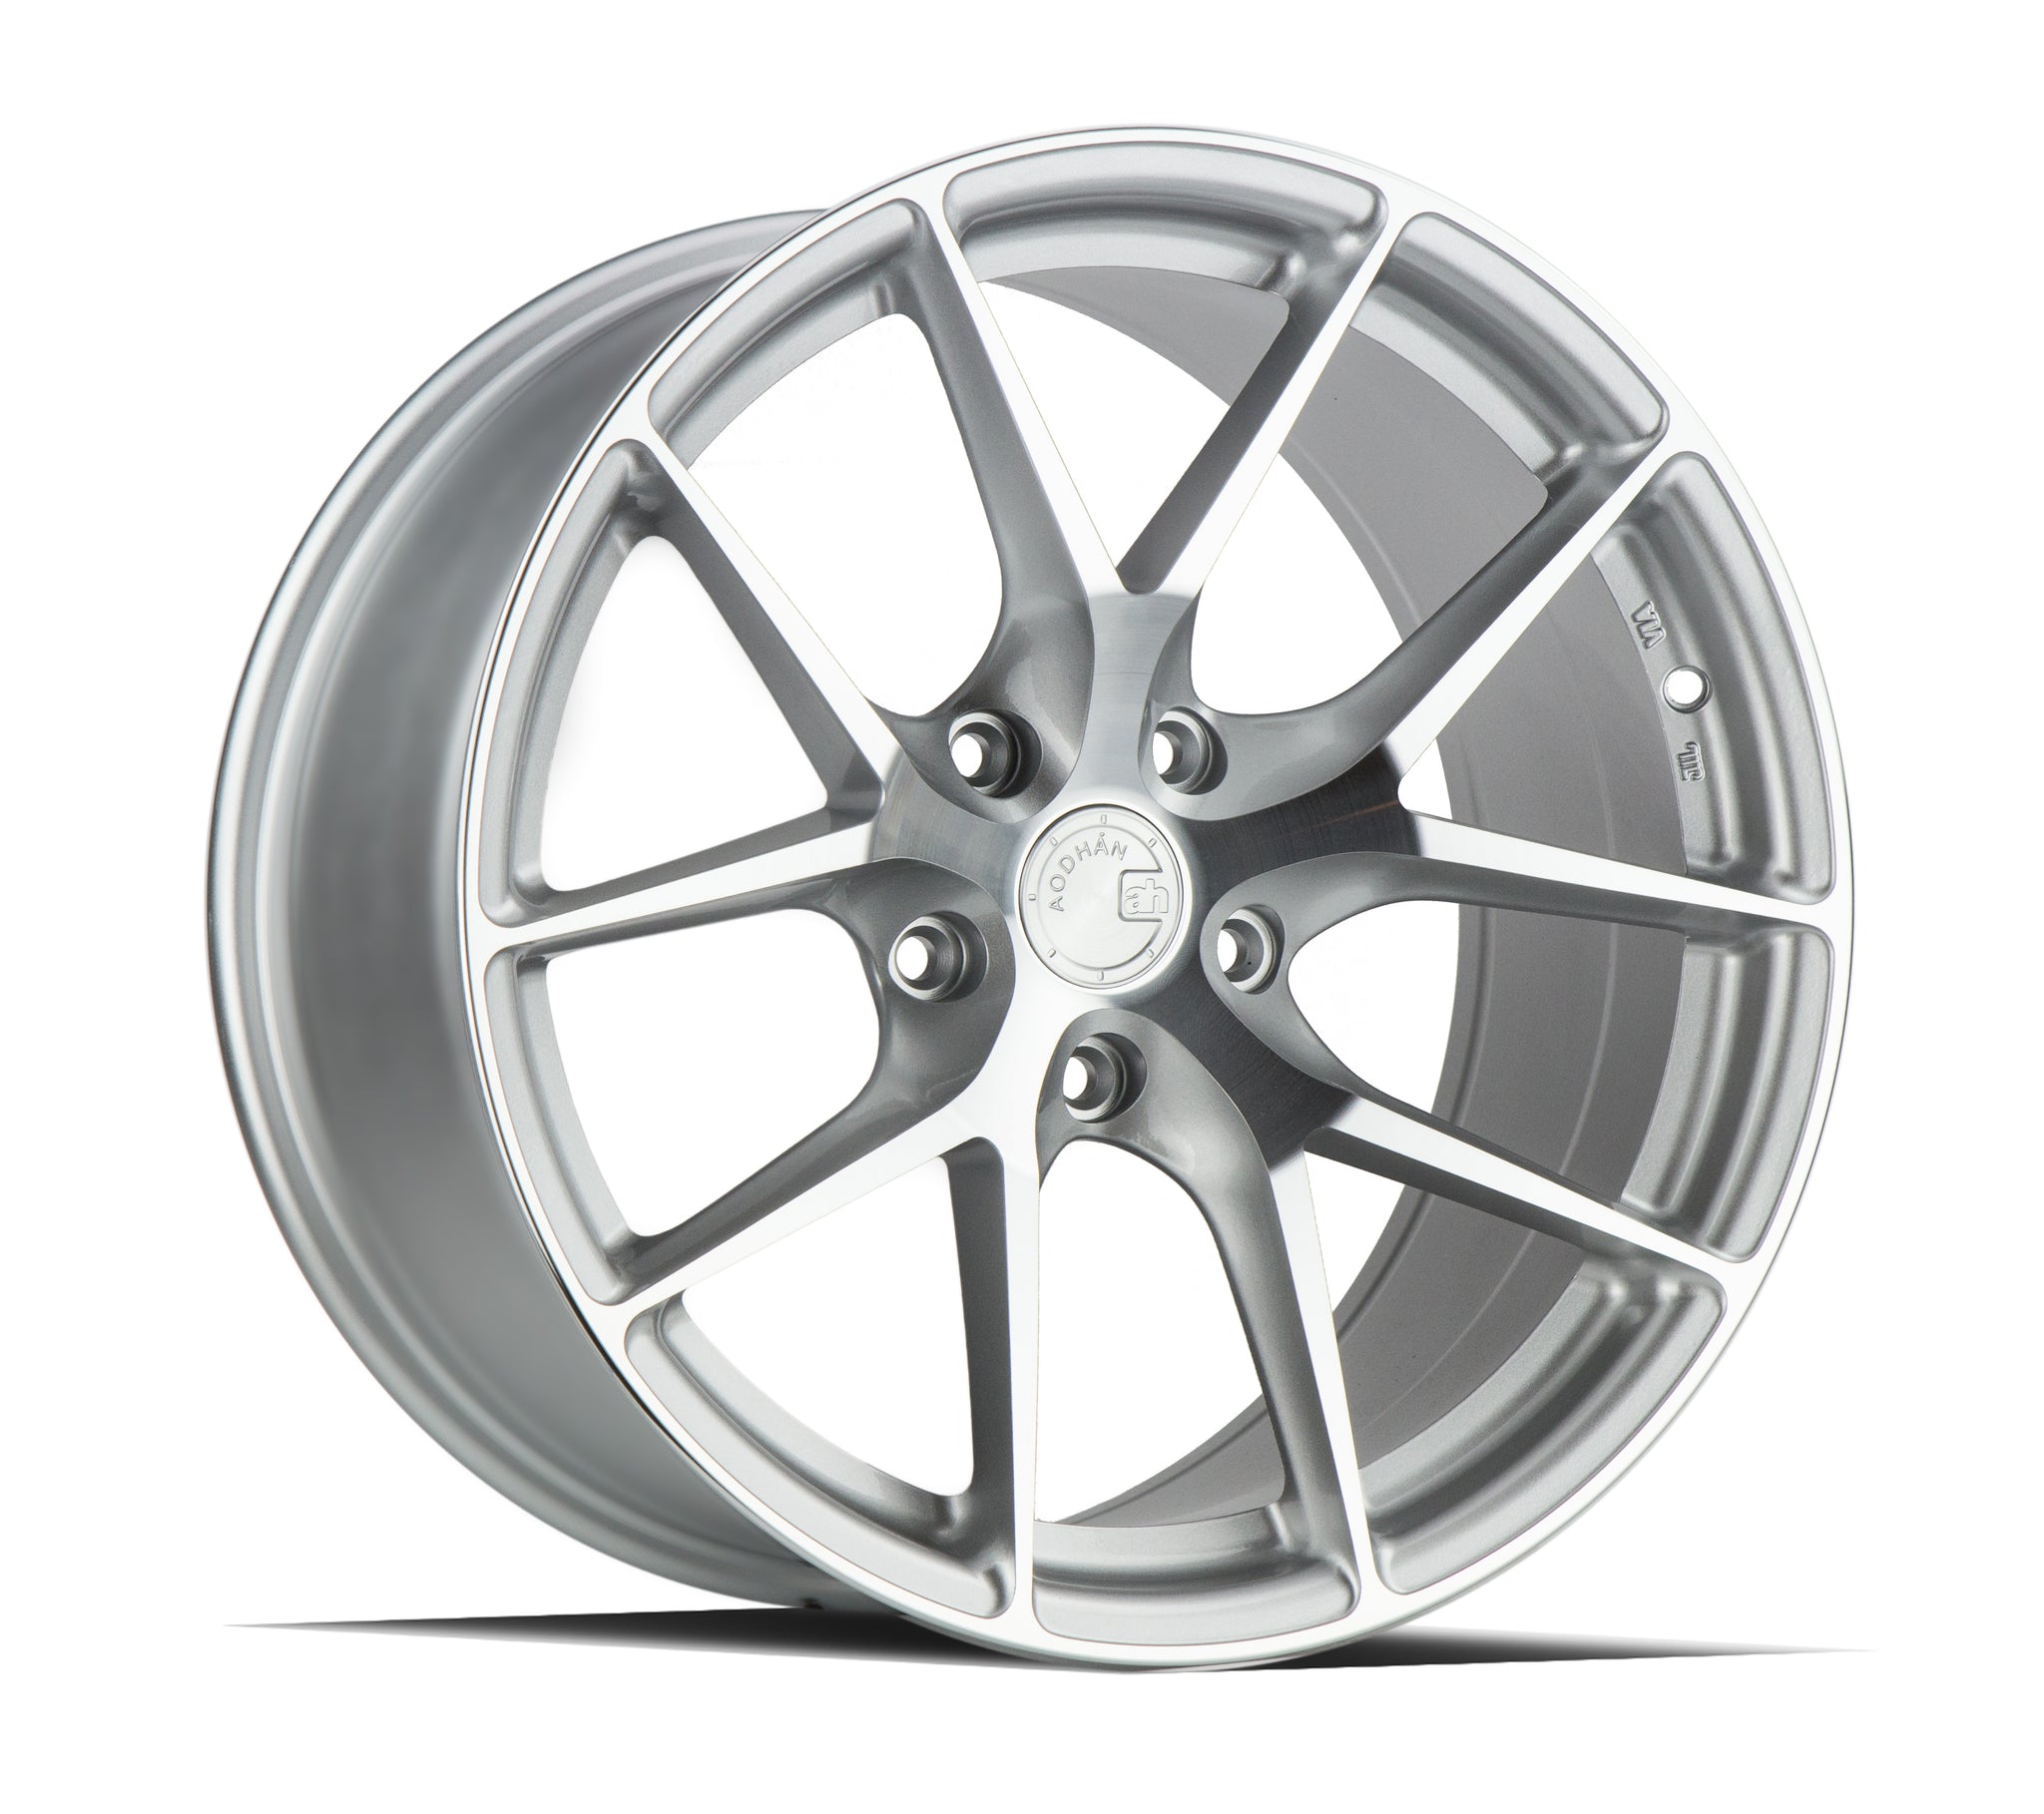 AODHAN AFF7 SILVER WITH MACHINED FACE WHEELS | 18X9.5 | 5X120 | OFFSET: 35MM | CB: 72.6MM